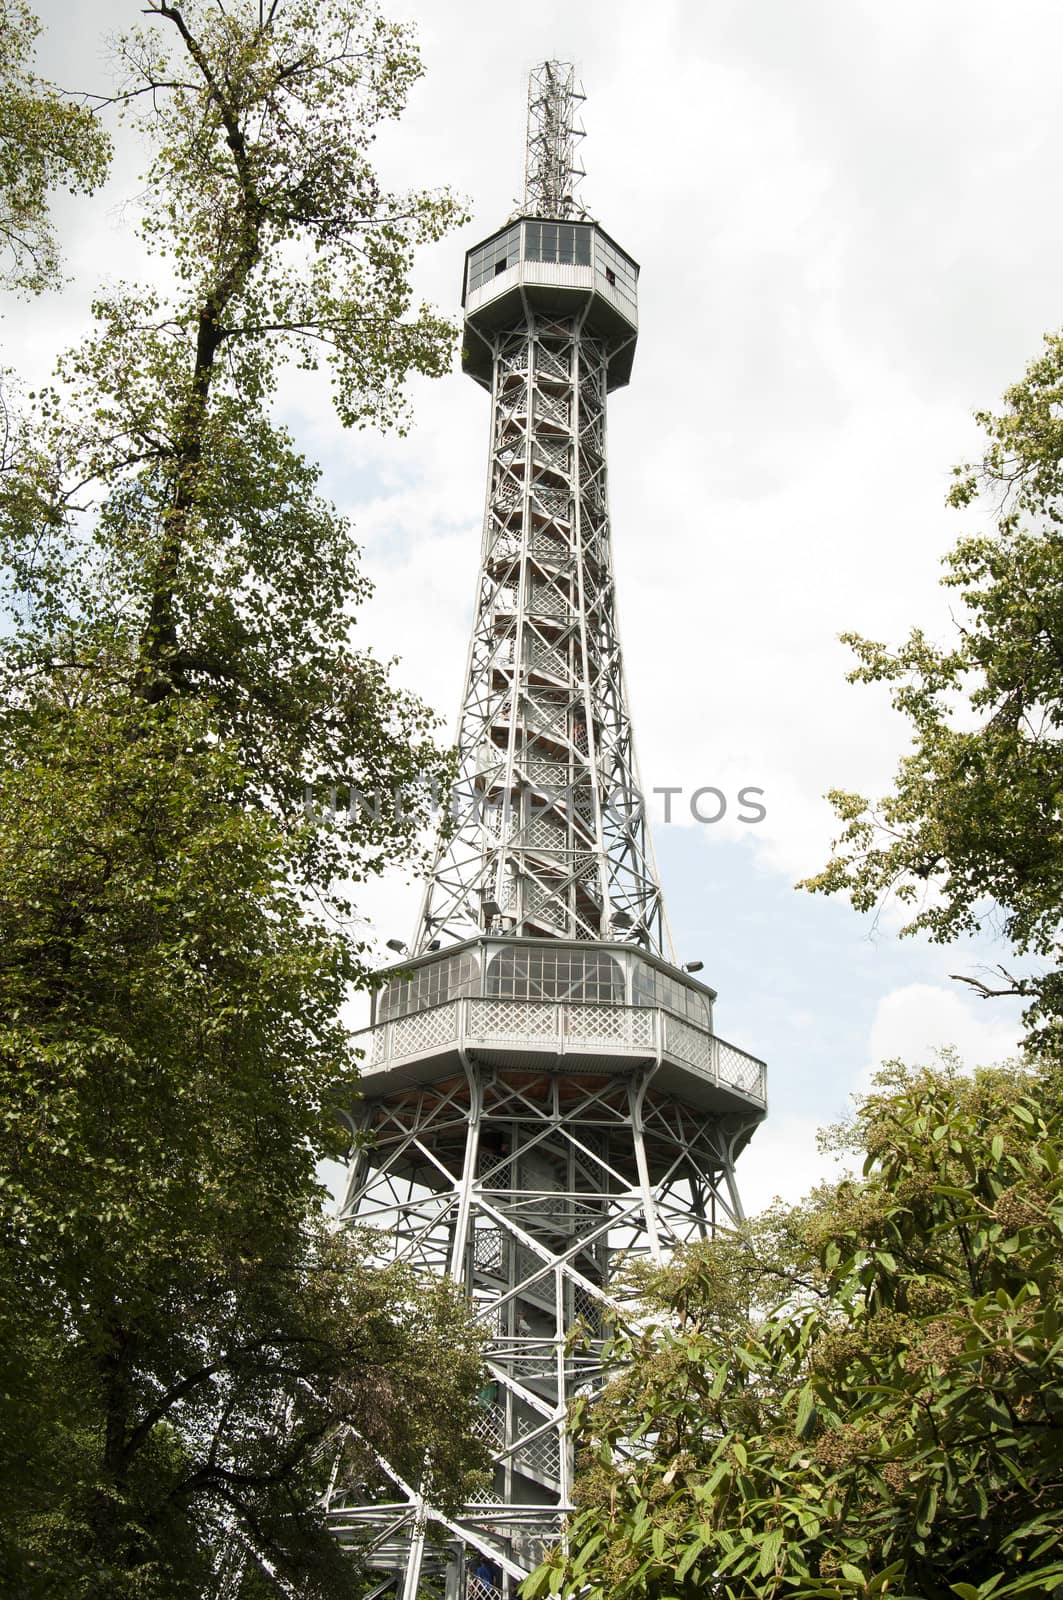 The Petrin Lookout Tower is a 63.5 metre high steel framework tower in Prague, which strongly resembles the Eiffel Tower. Although it is much shorter than the Eiffel Tower, it stands at the top a sizable hill.